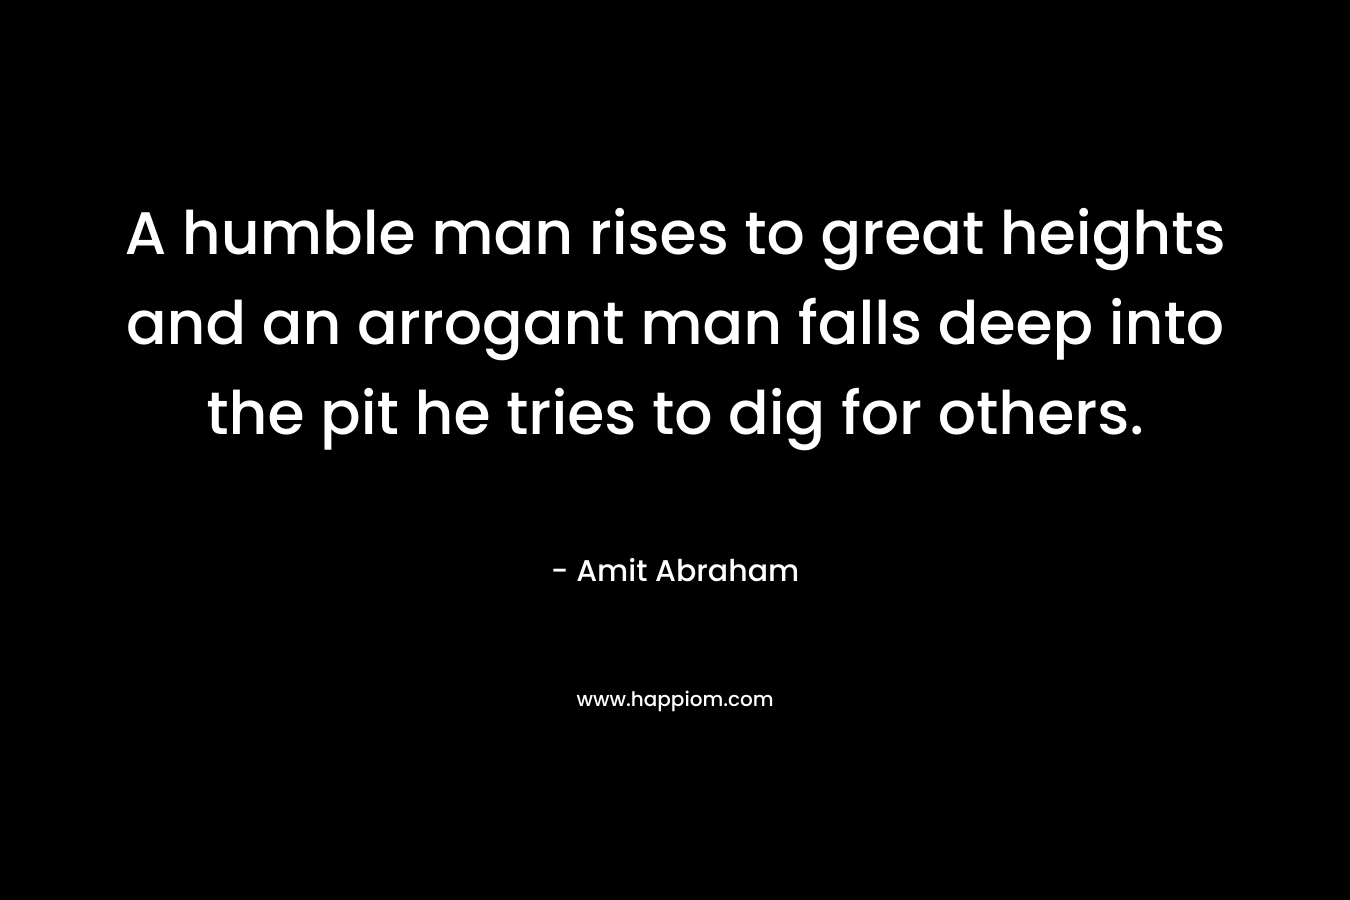 A humble man rises to great heights and an arrogant man falls deep into the pit he tries to dig for others.